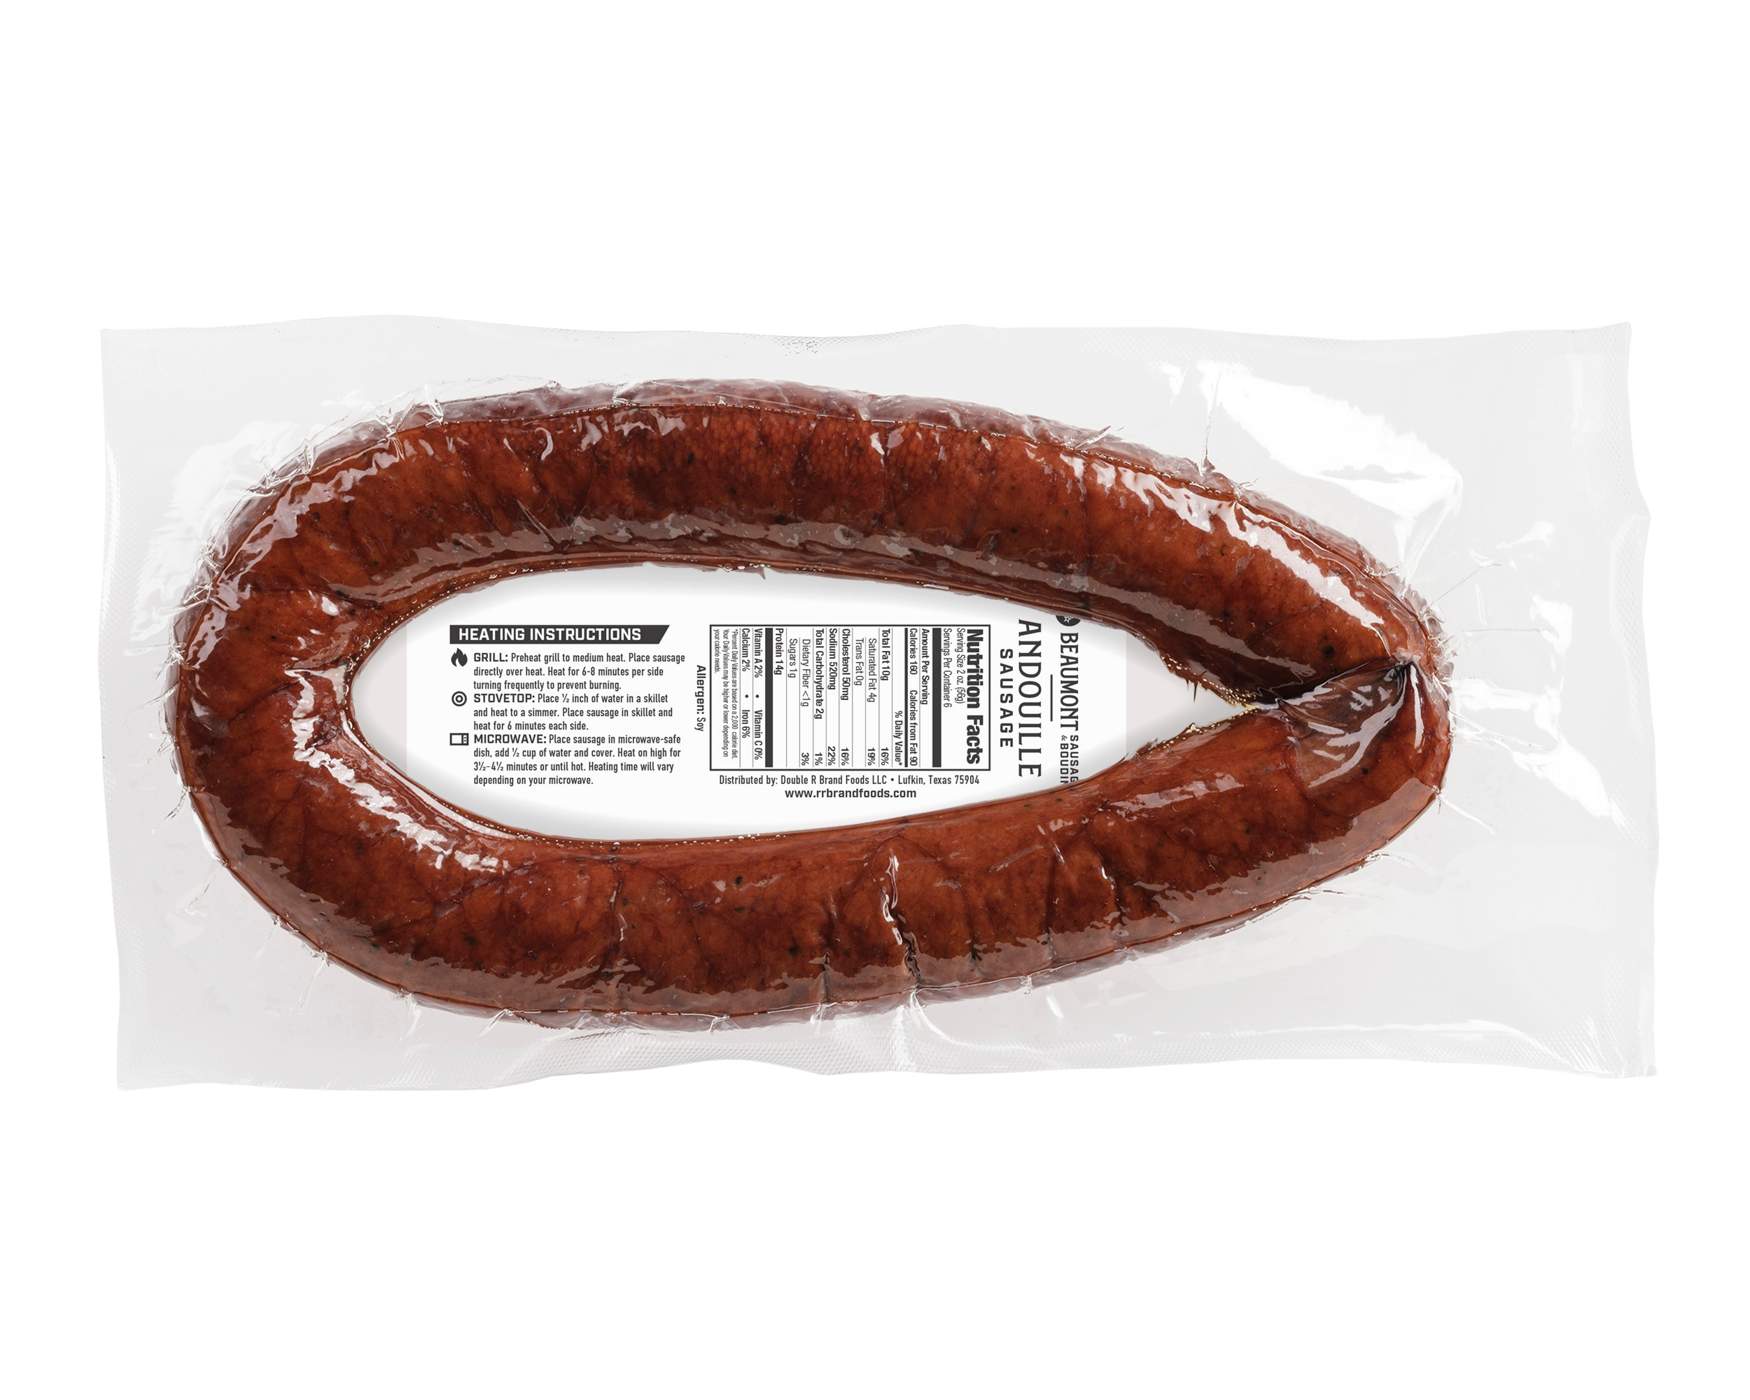 Beaumont Sausage & Boudin Co. Andouille Sausage; image 2 of 2